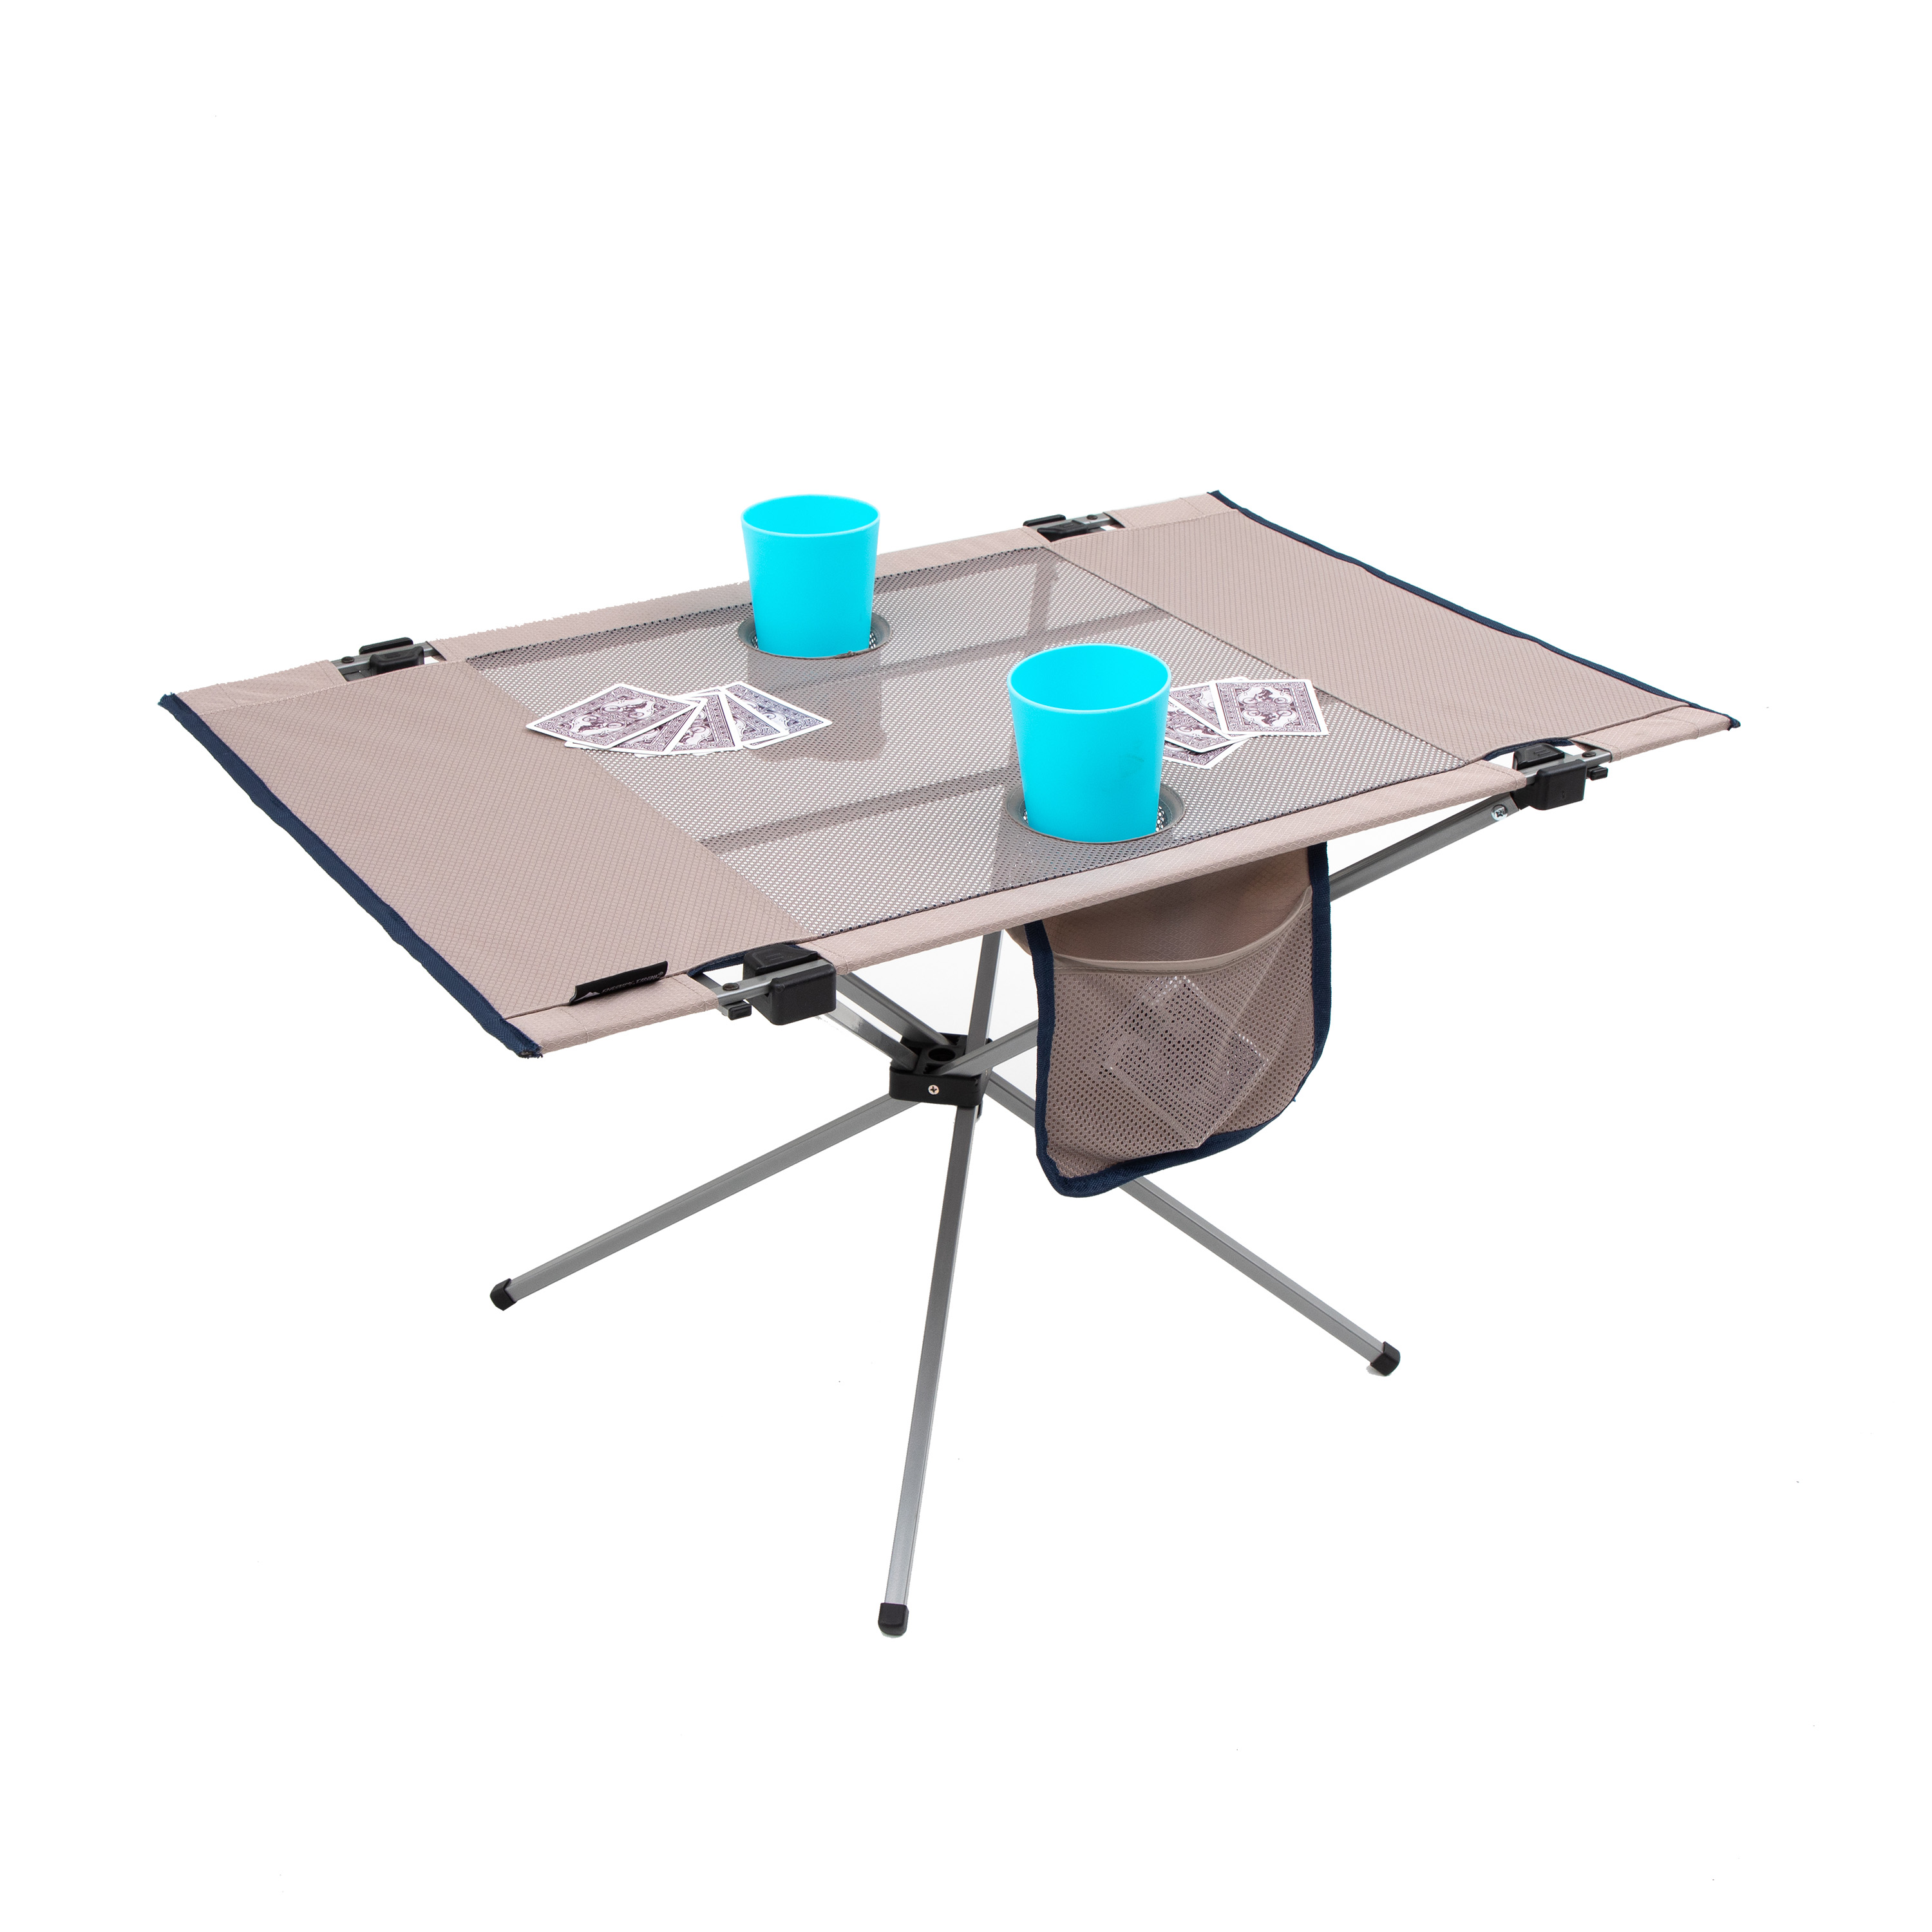 Ozark Trail Portable High-Tension Travel Table, Open Size 20.5 in x 31.5 in x 18.1 in - image 4 of 8